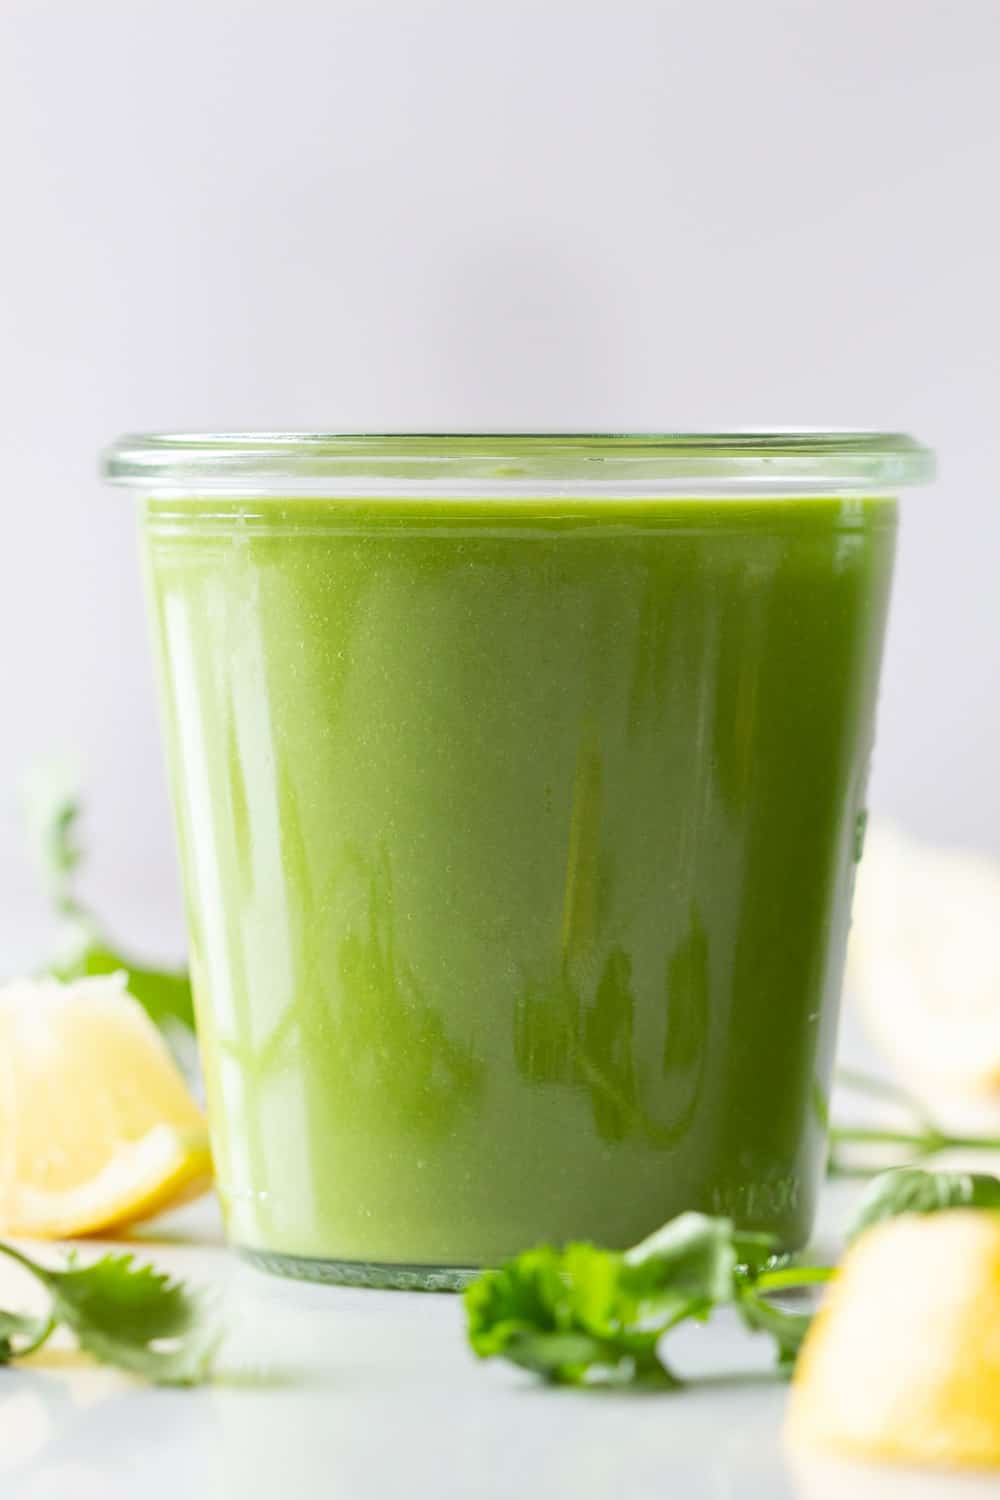 A vibrantly green Keto Smoothie in a glass.